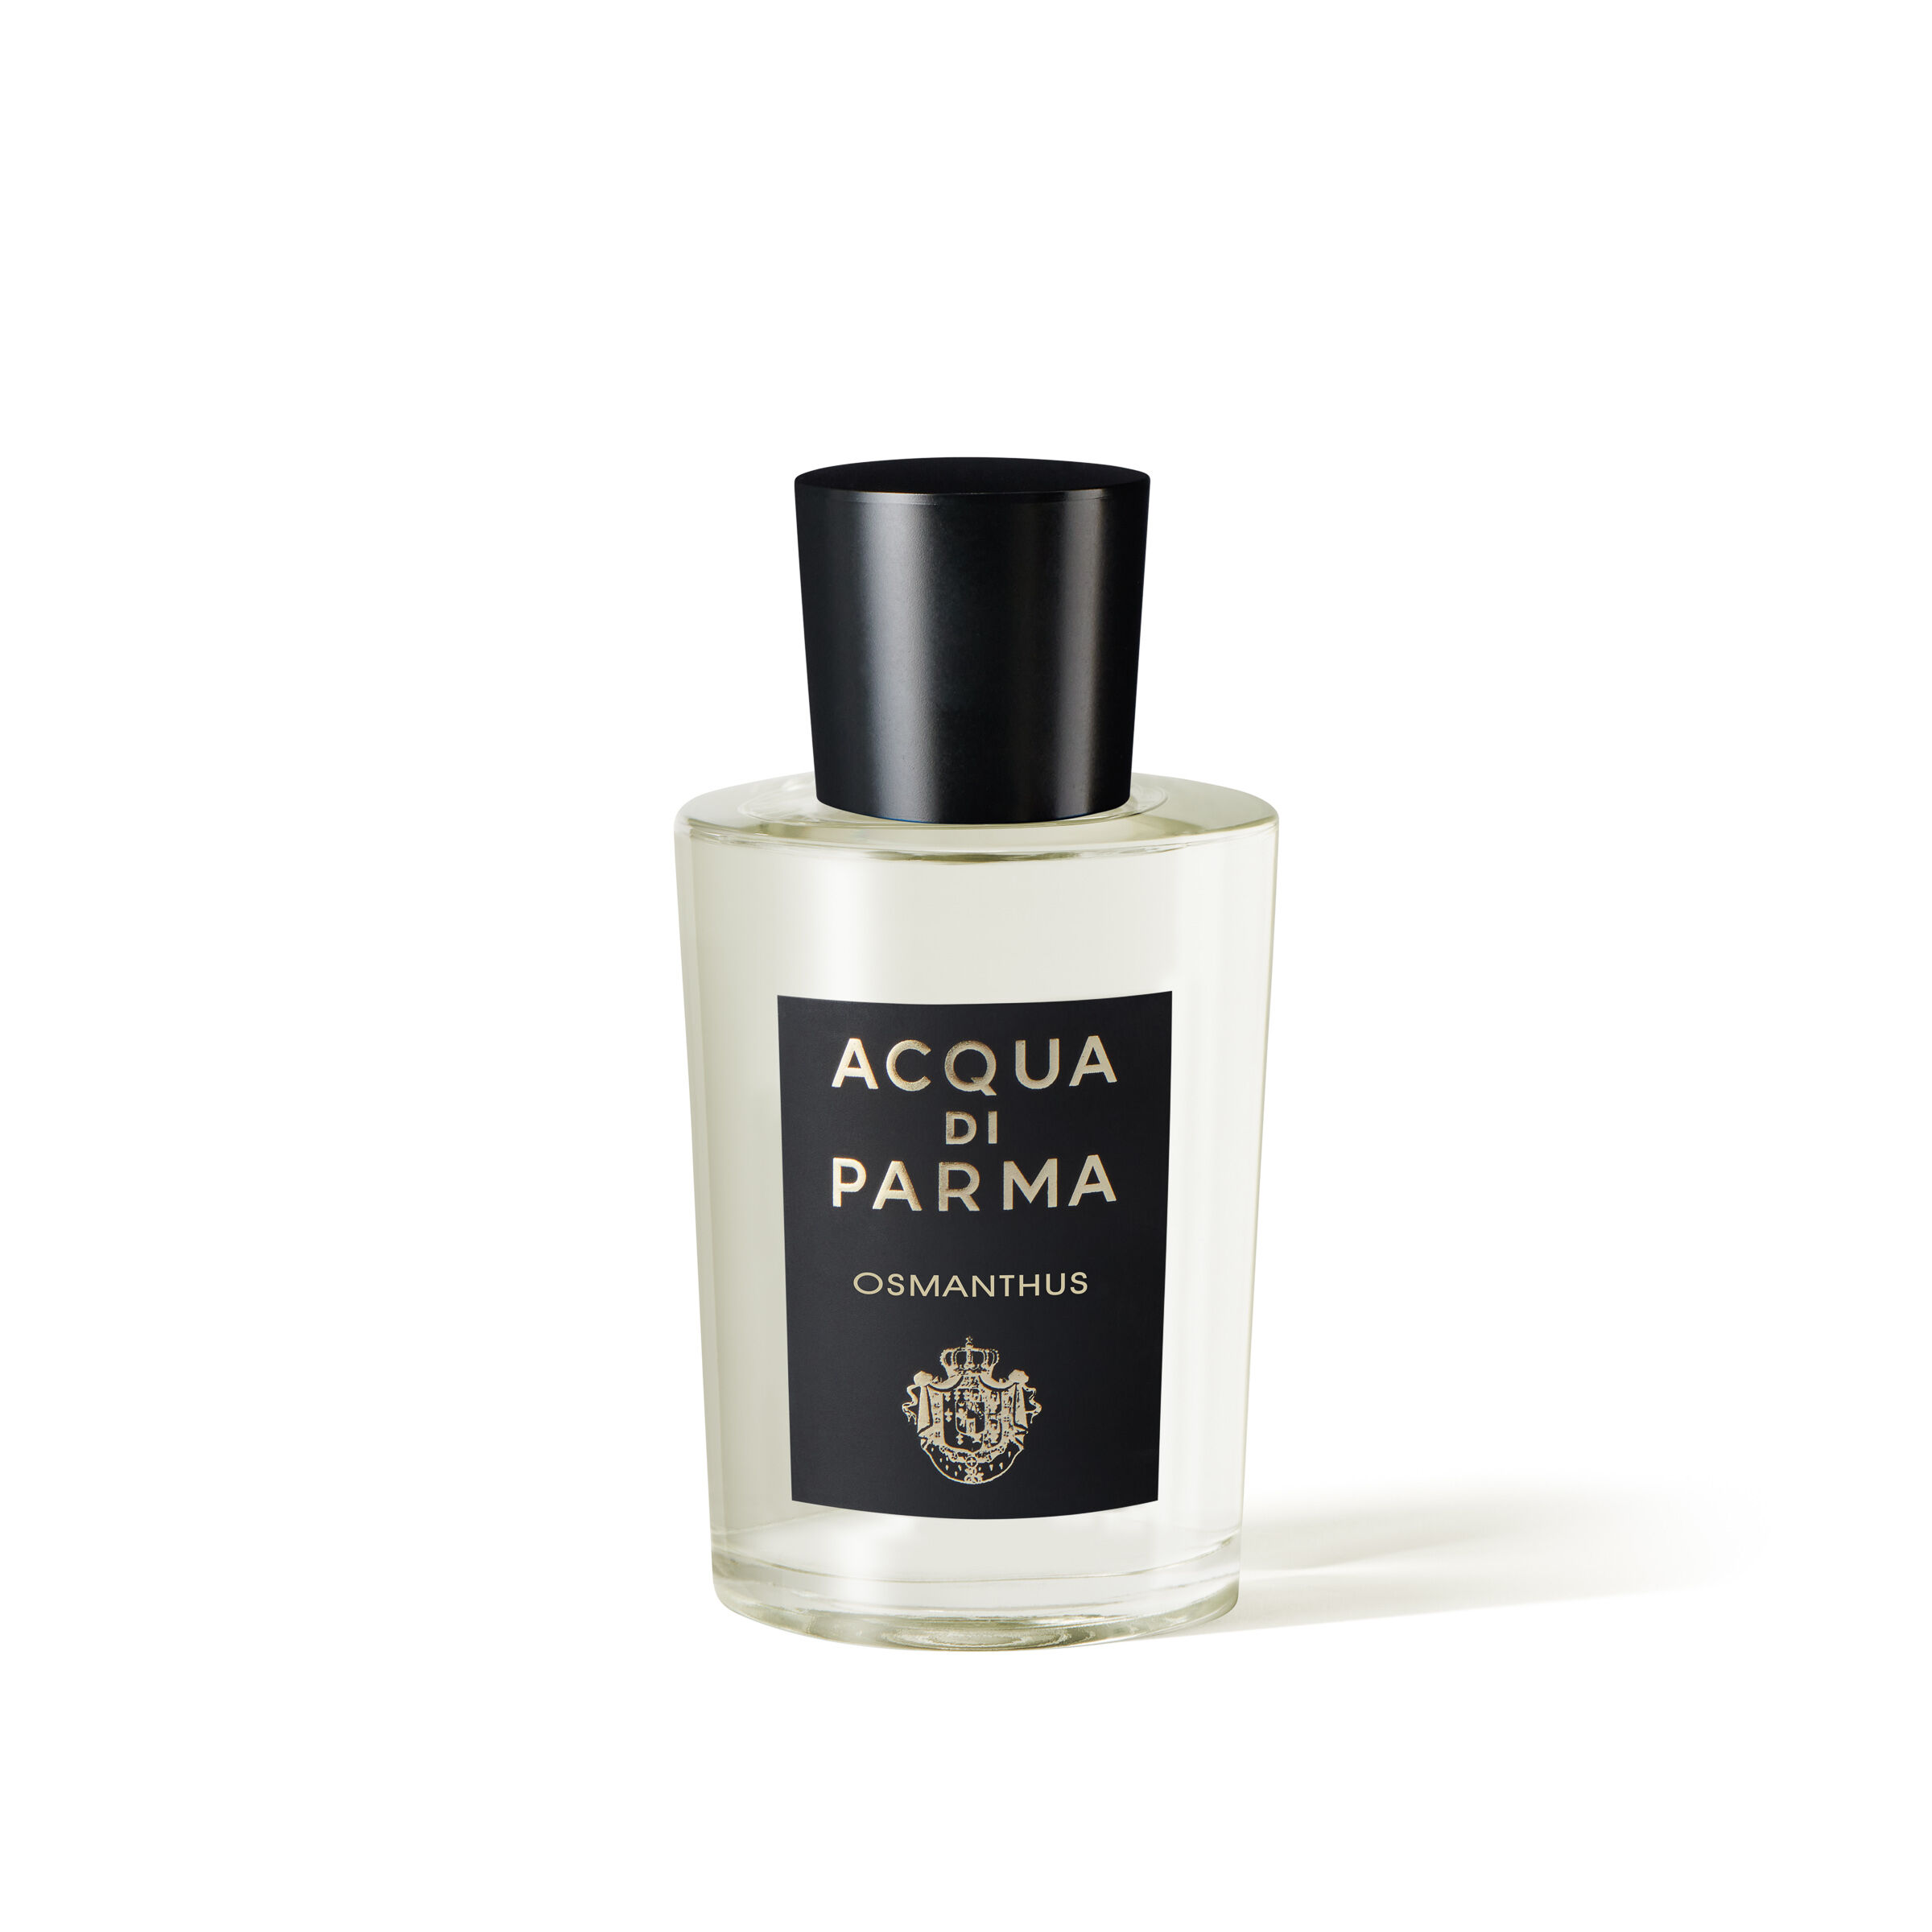 Shop Osmanthus perfume by Acqua di Parma. The precious scent of the  osmanthus flower meets luminous citrusy delight in a floral and fruity  fragrance 